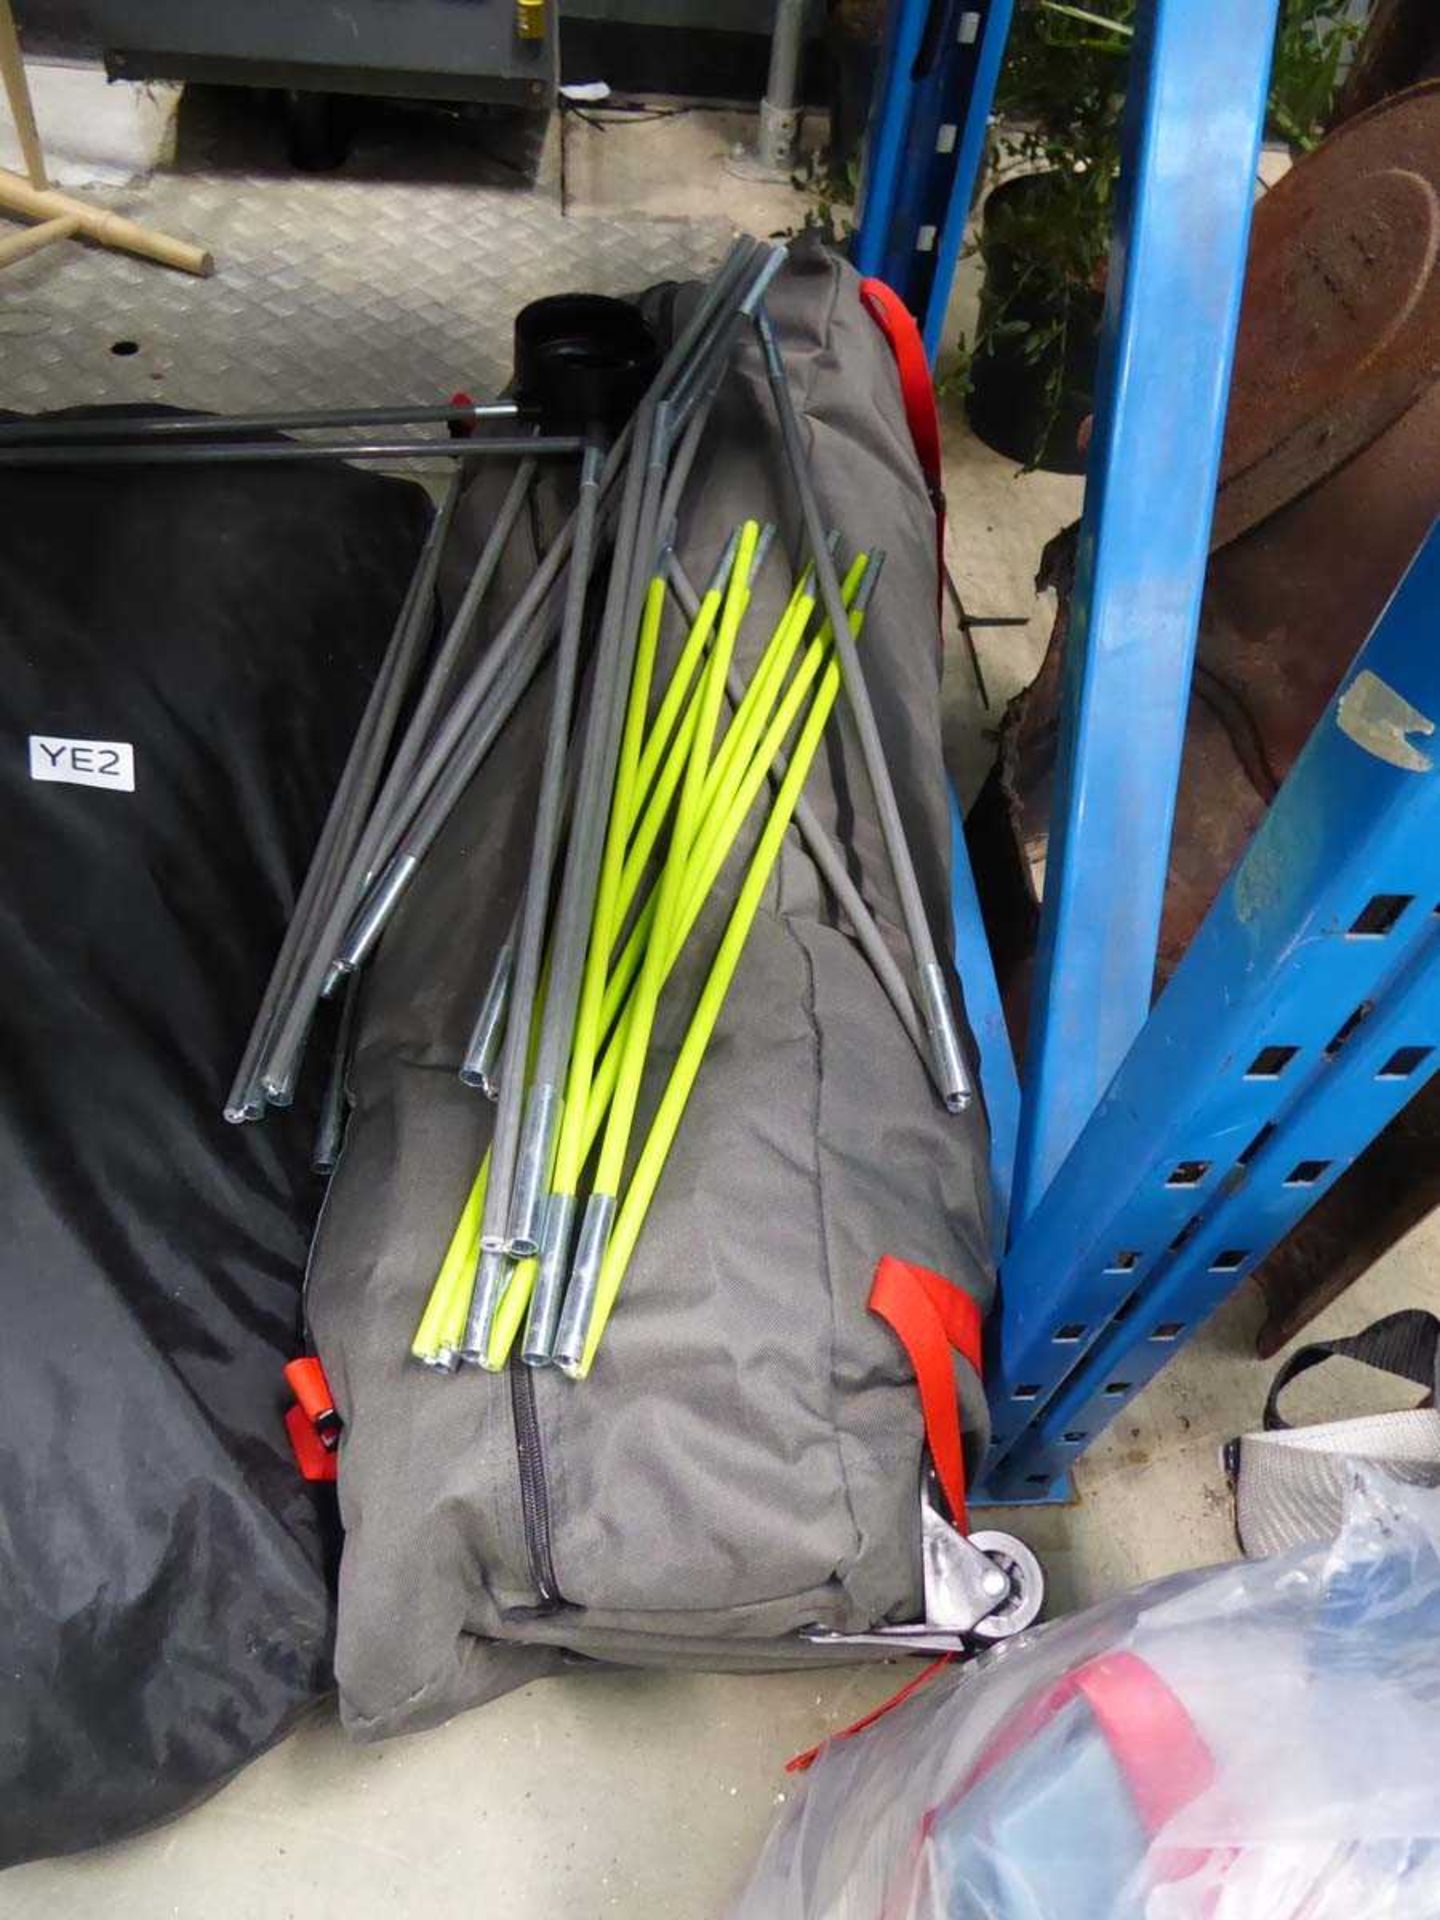 +VAT Bag containing various tent parts Not as shown on side of bag